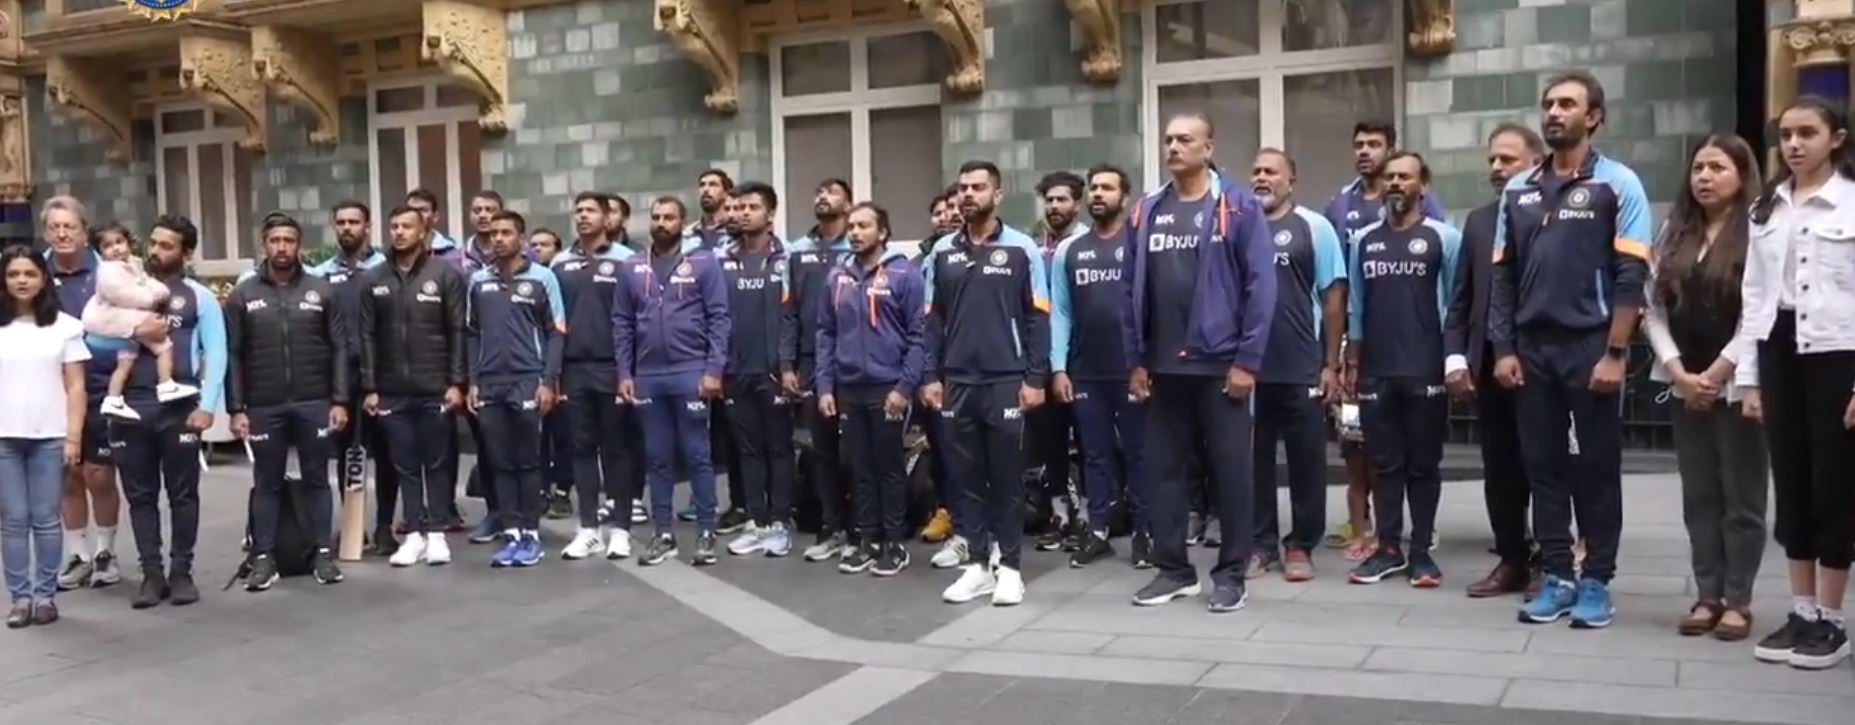 The Indian team members singing the national anthem in London | BCCI Twitter